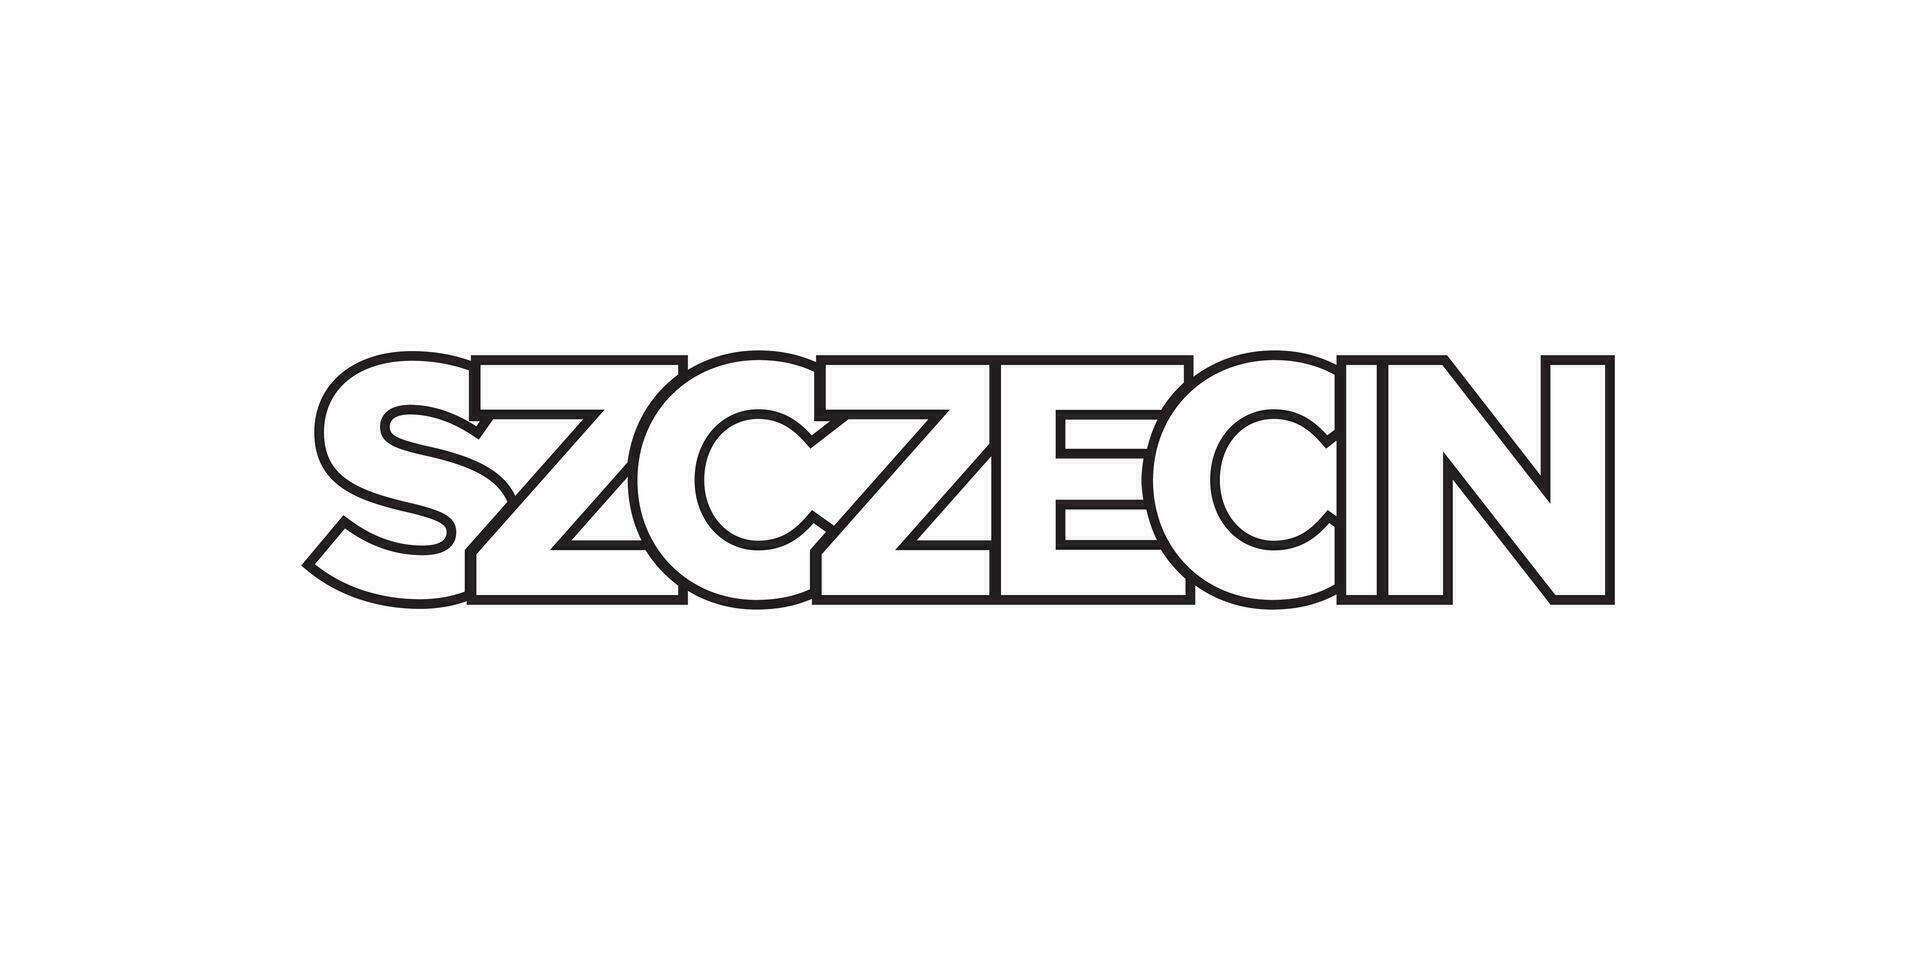 Szczecin in the Poland emblem. The design features a geometric style, vector illustration with bold typography in a modern font. The graphic slogan lettering.